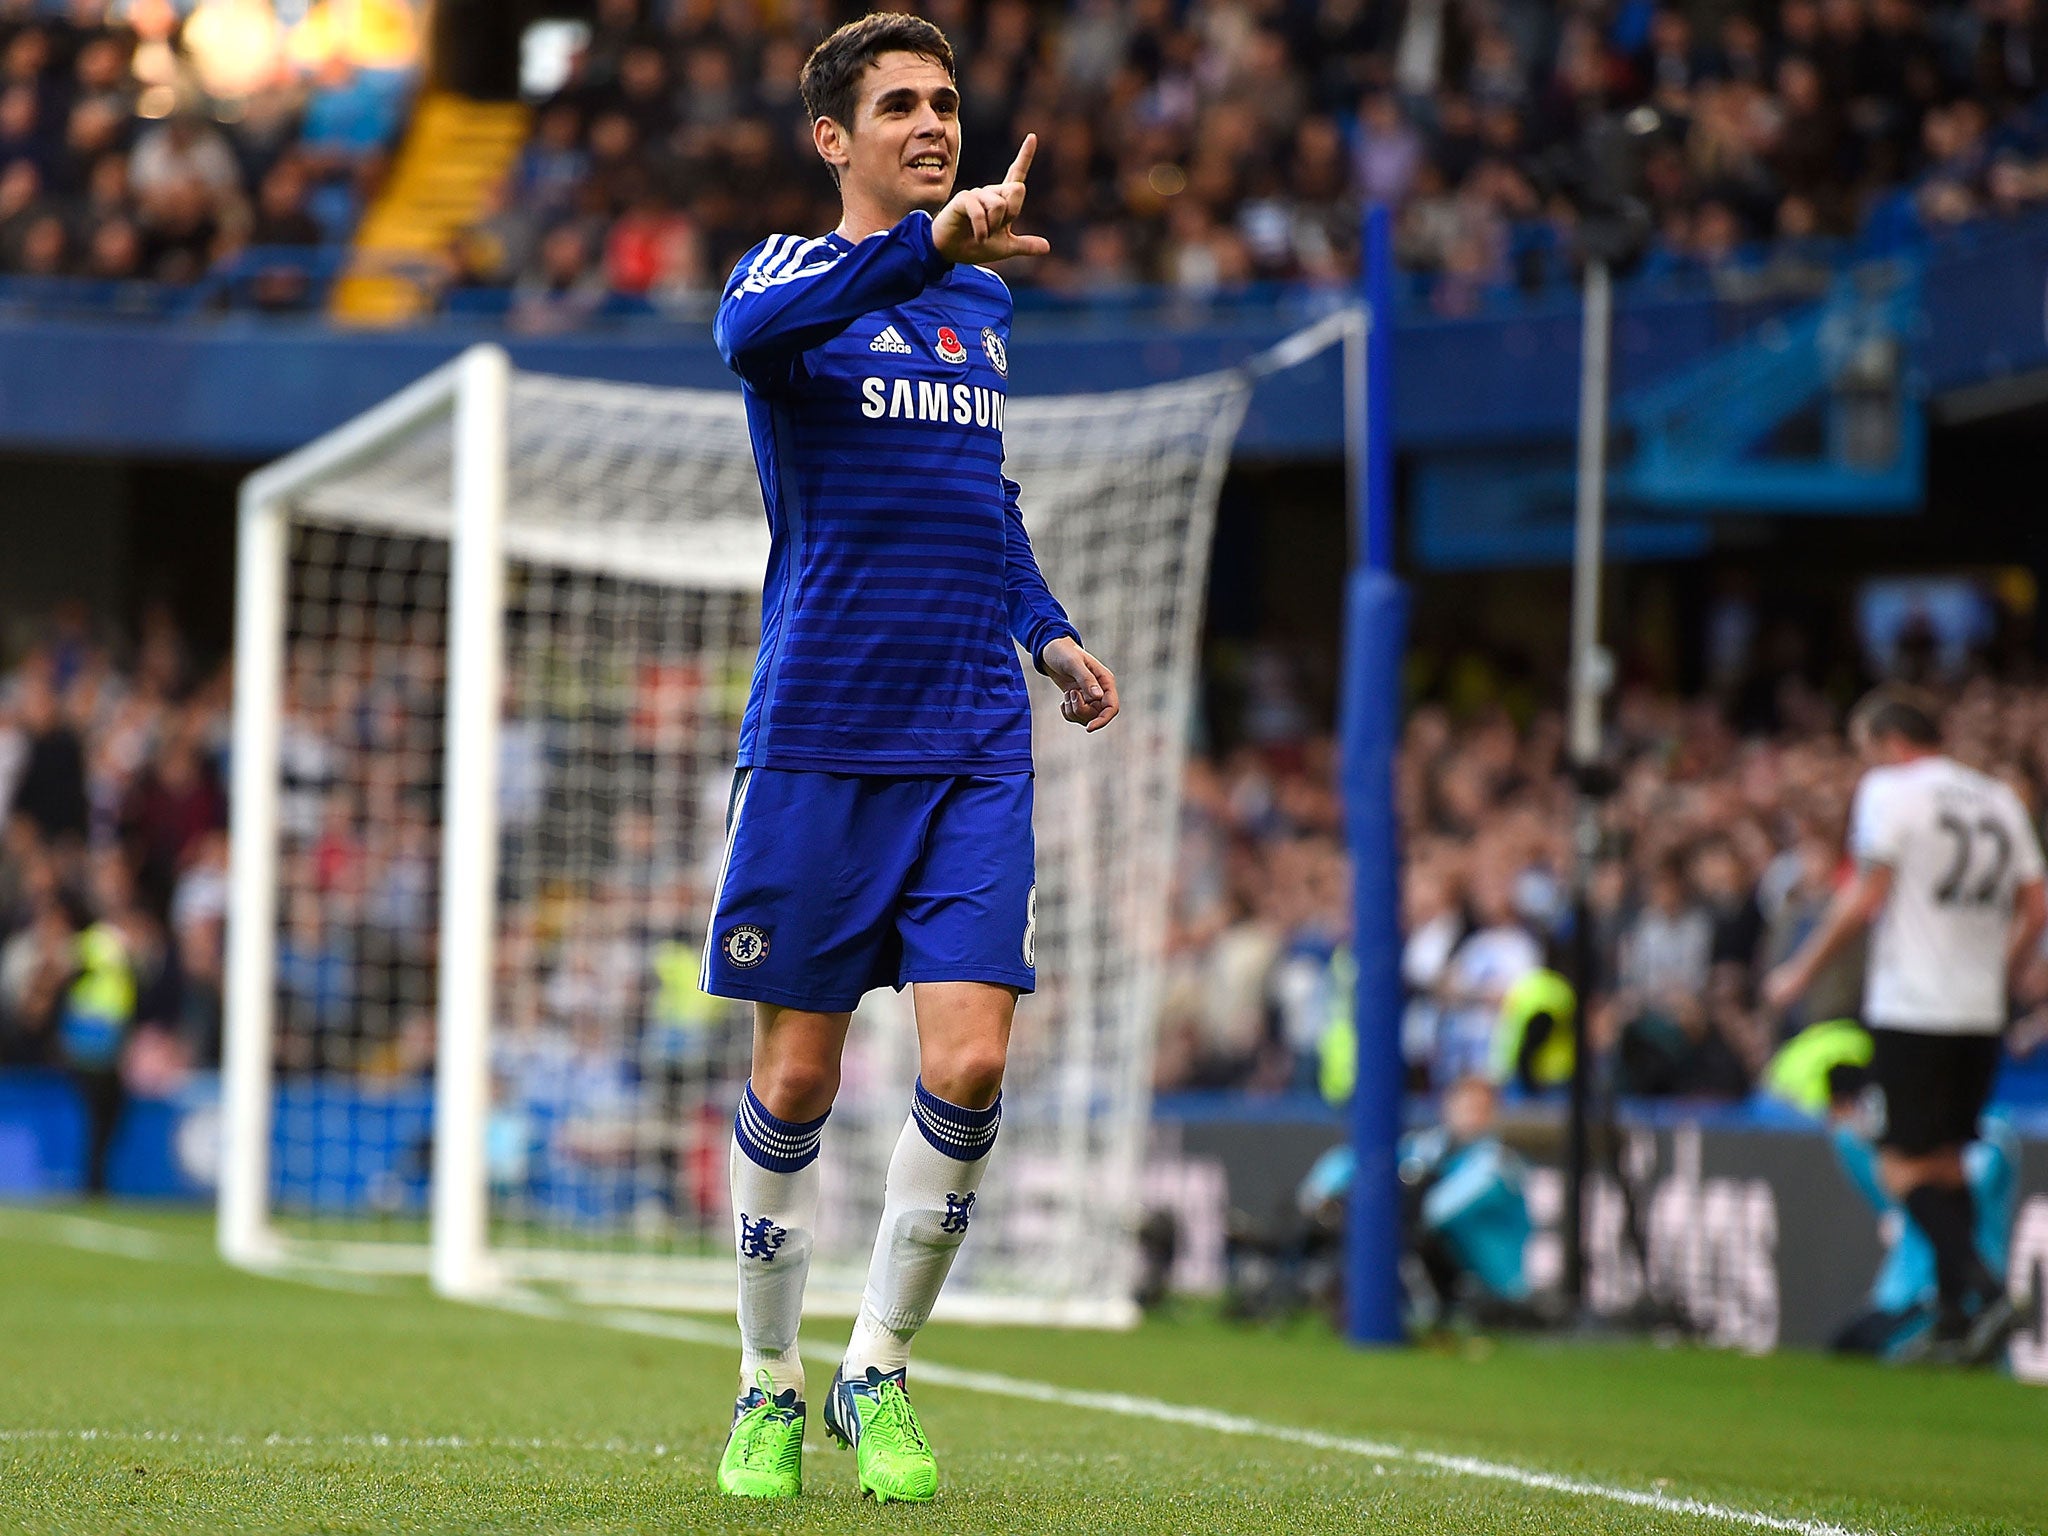 Oscar looks set to be on his way out from Chelsea in the January transfer window